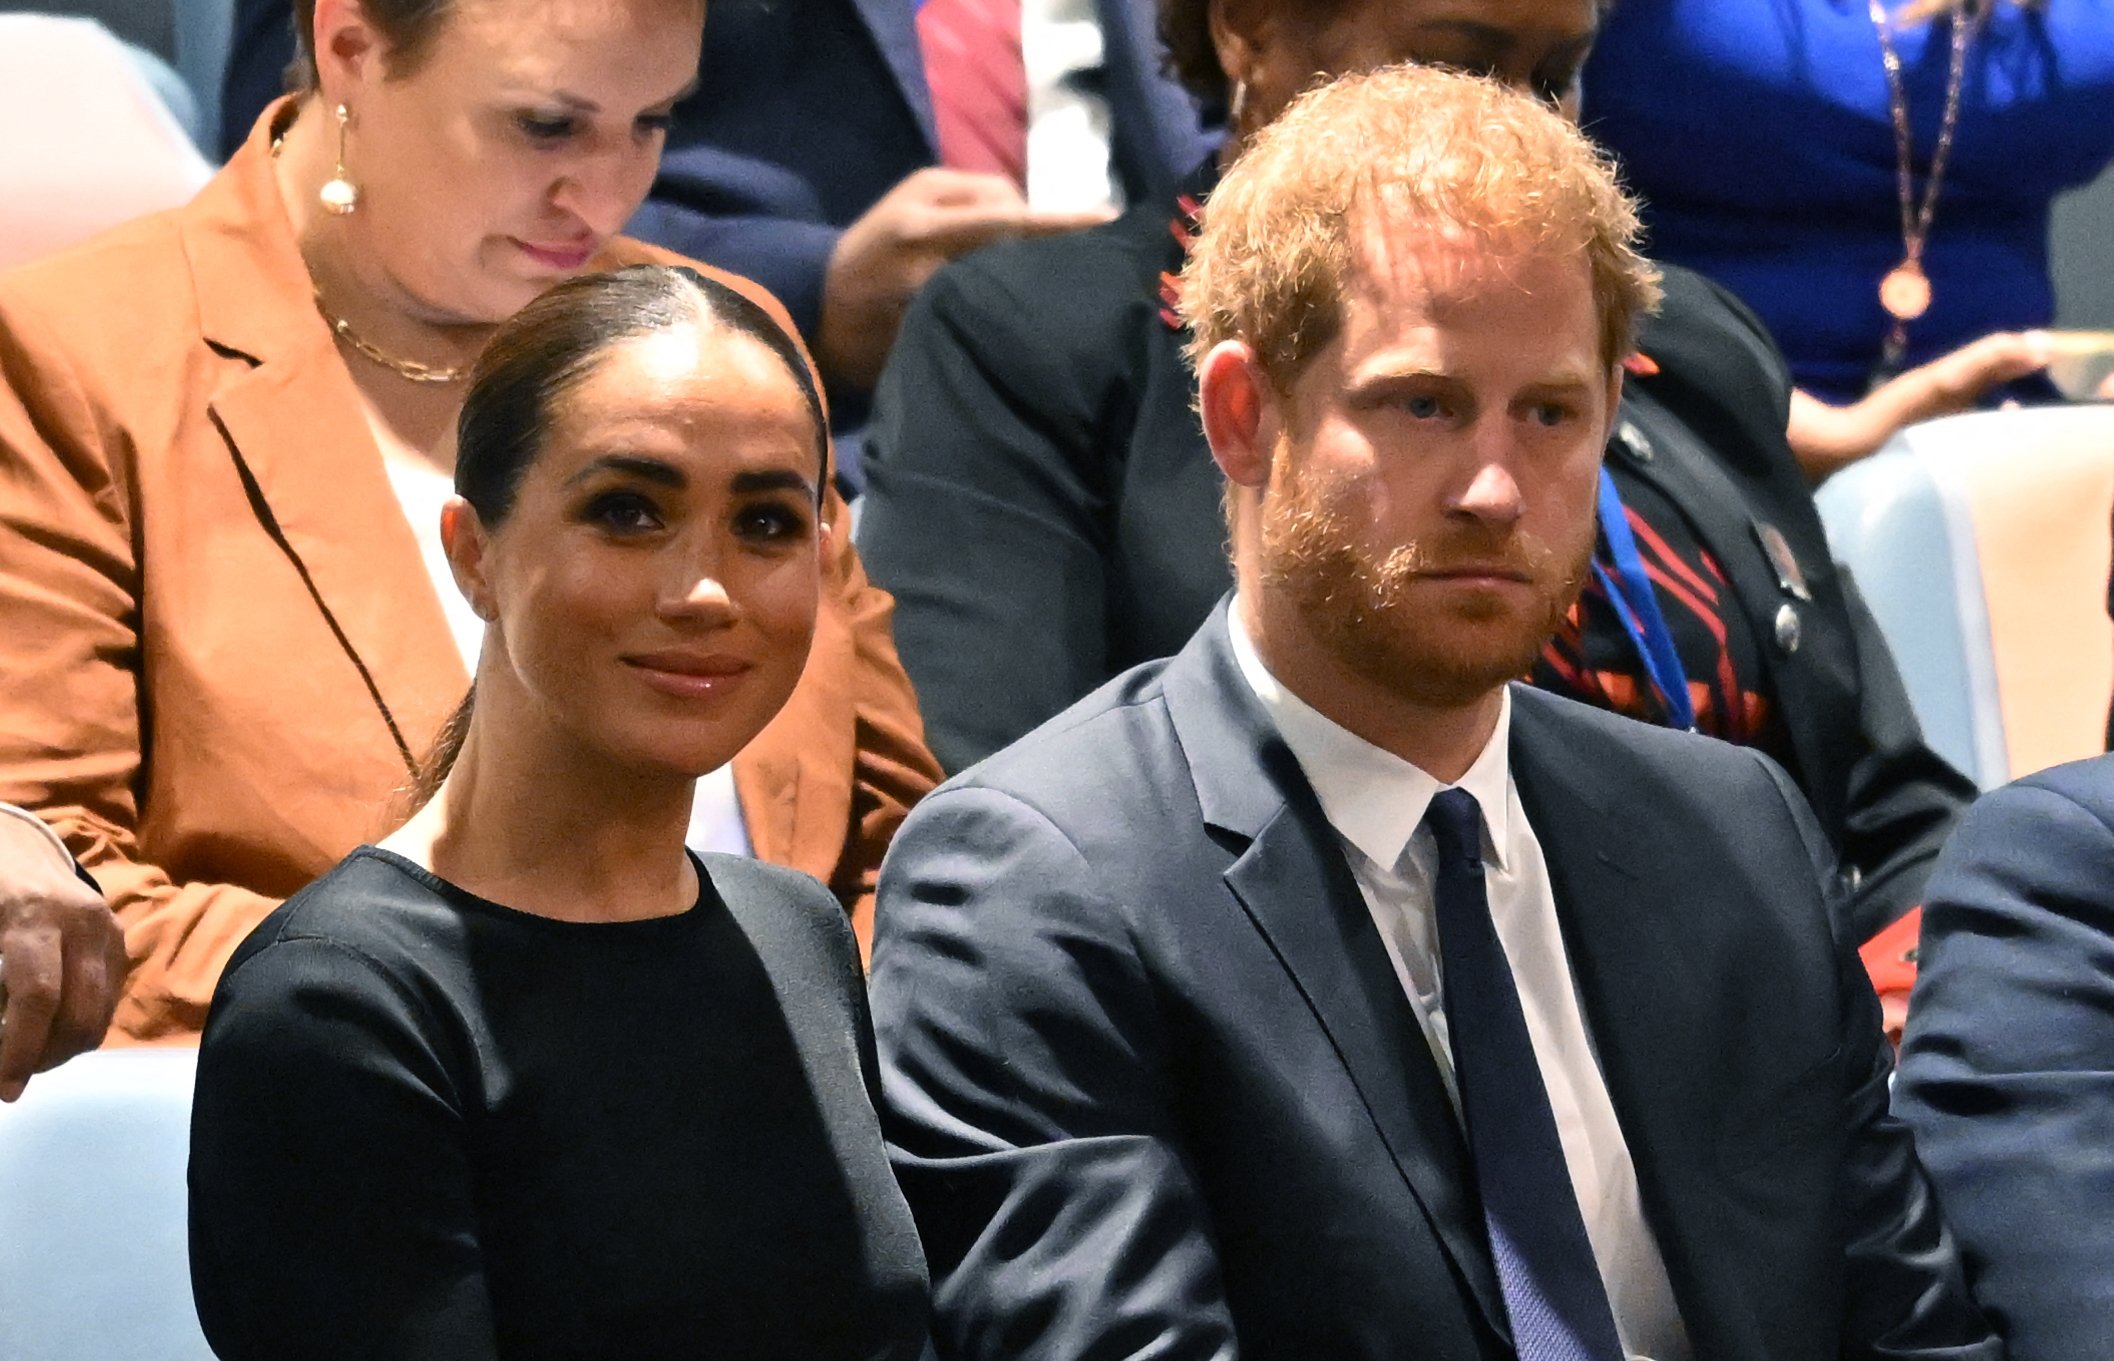 Meghan Markle and Prince Harry in New York in 2022. | Source: Getty Images